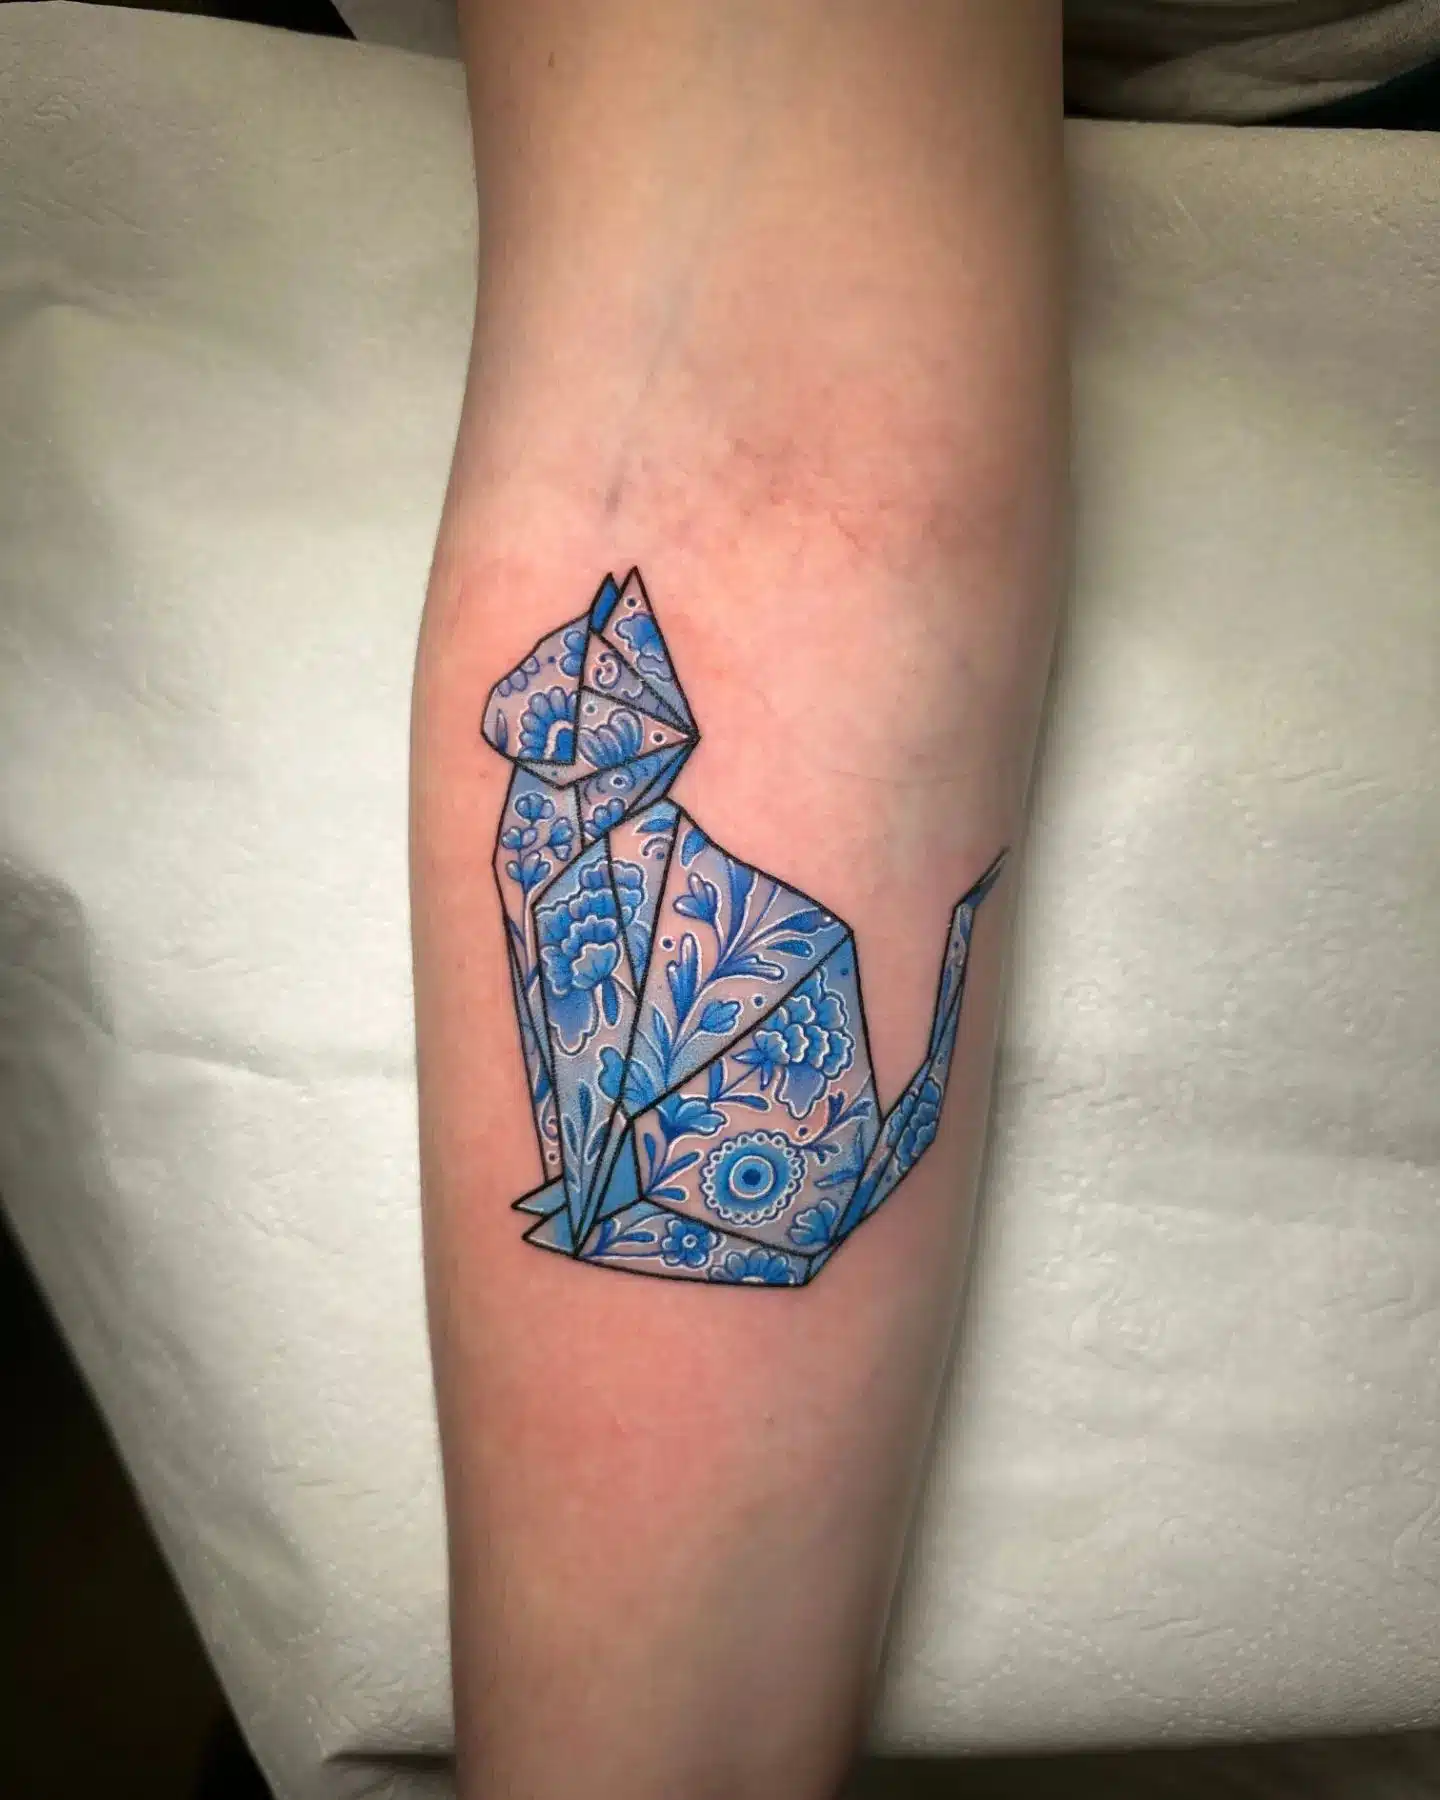 Origami porcelain cat by Noemi for lovely Sarah!
noemi_tattoo

Supplies by our sponsors:
magnumtattoosupplies.uk

Done using:
dragonhawkofficial
worldfamousink
allegoryink 
unigloves 

               uktta tattoosnob     